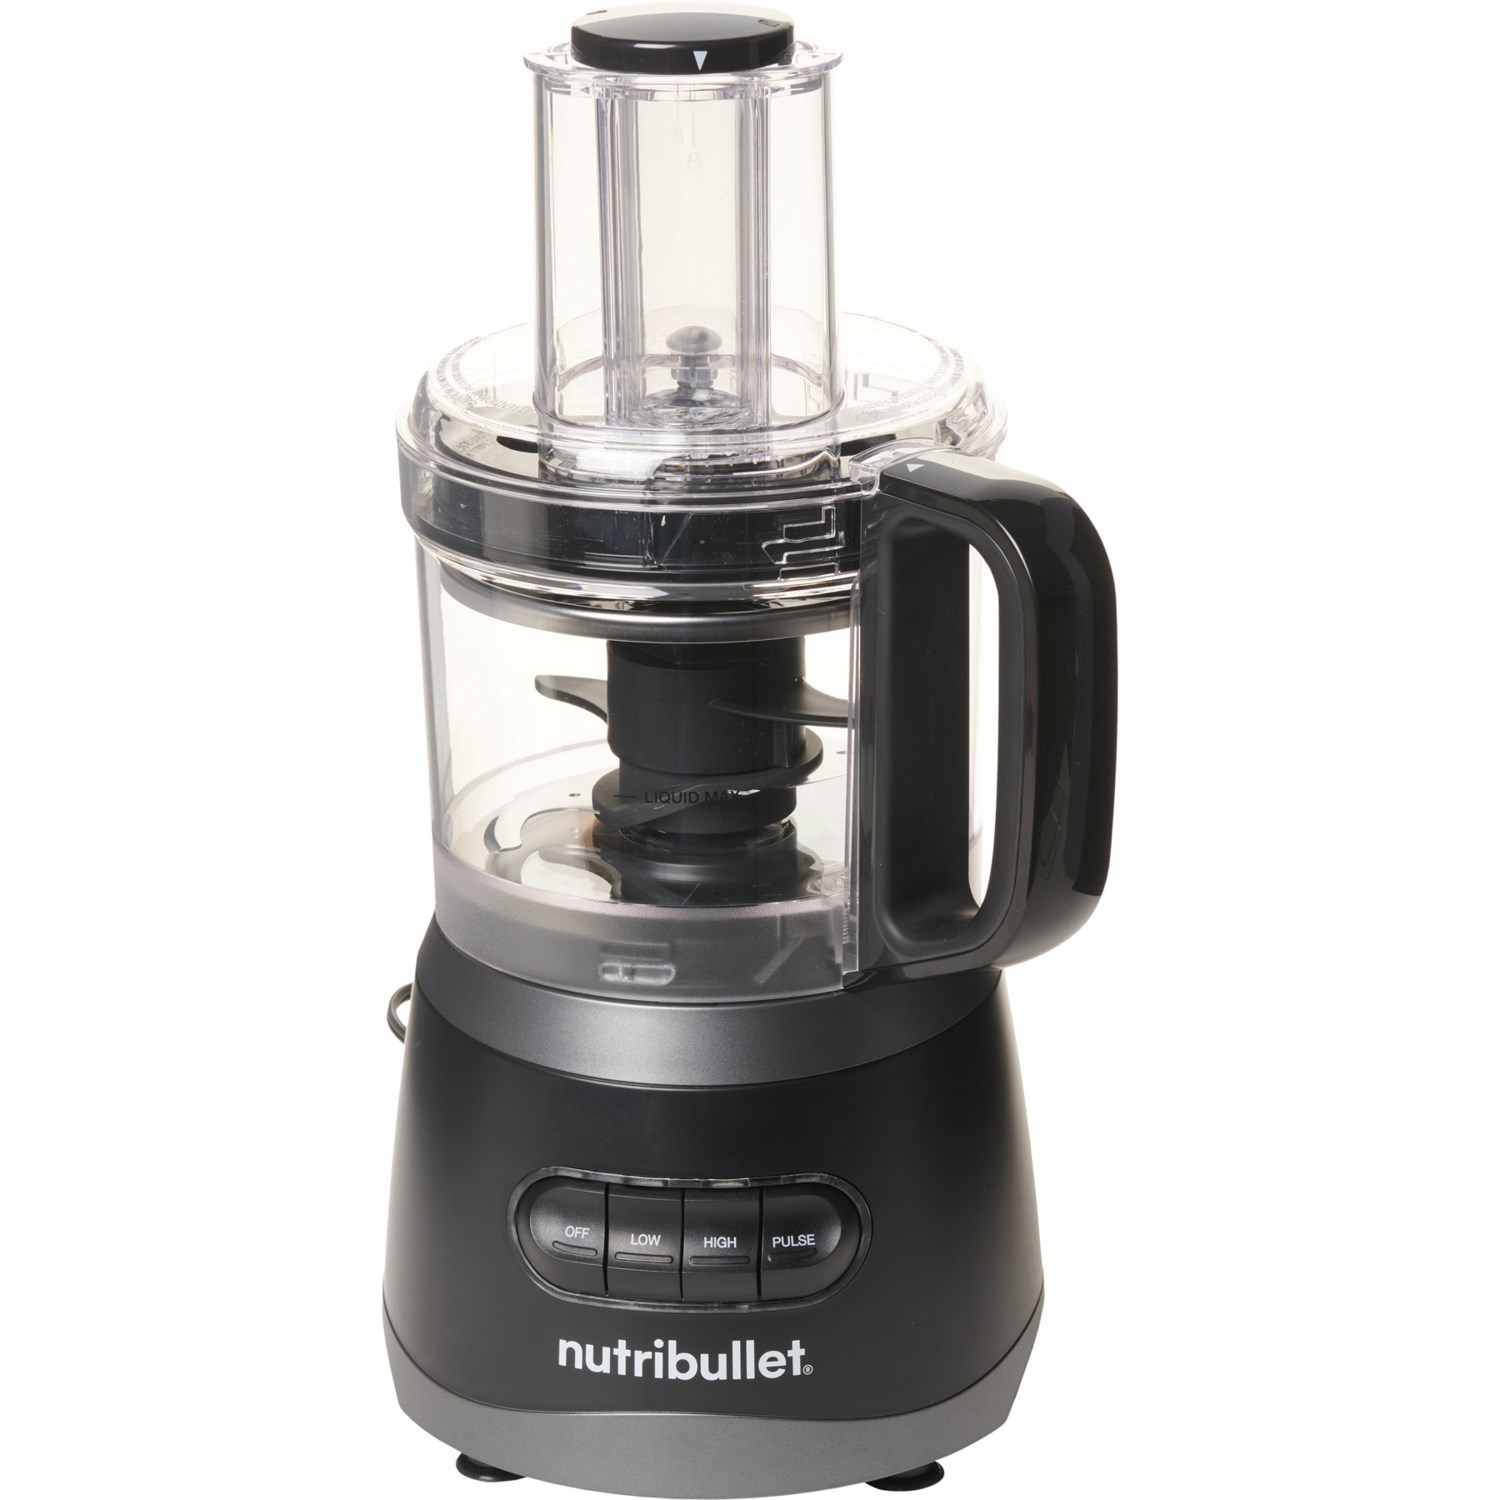 Reviews for NutriBullet 7-Cup Food Processor